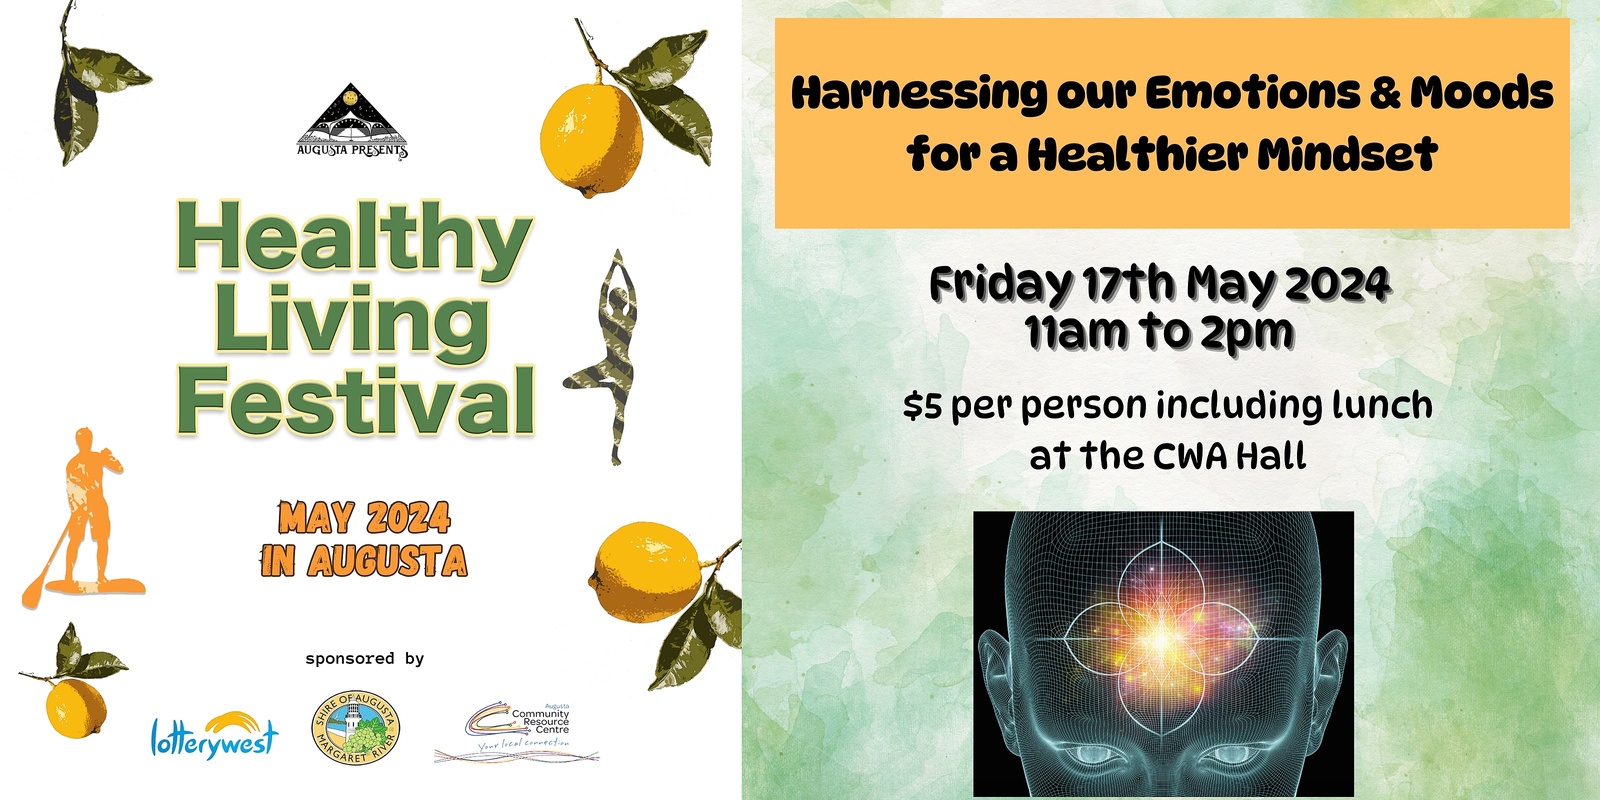 Banner image for Harnessing our Emotions & Moods for a Healthier Mindset